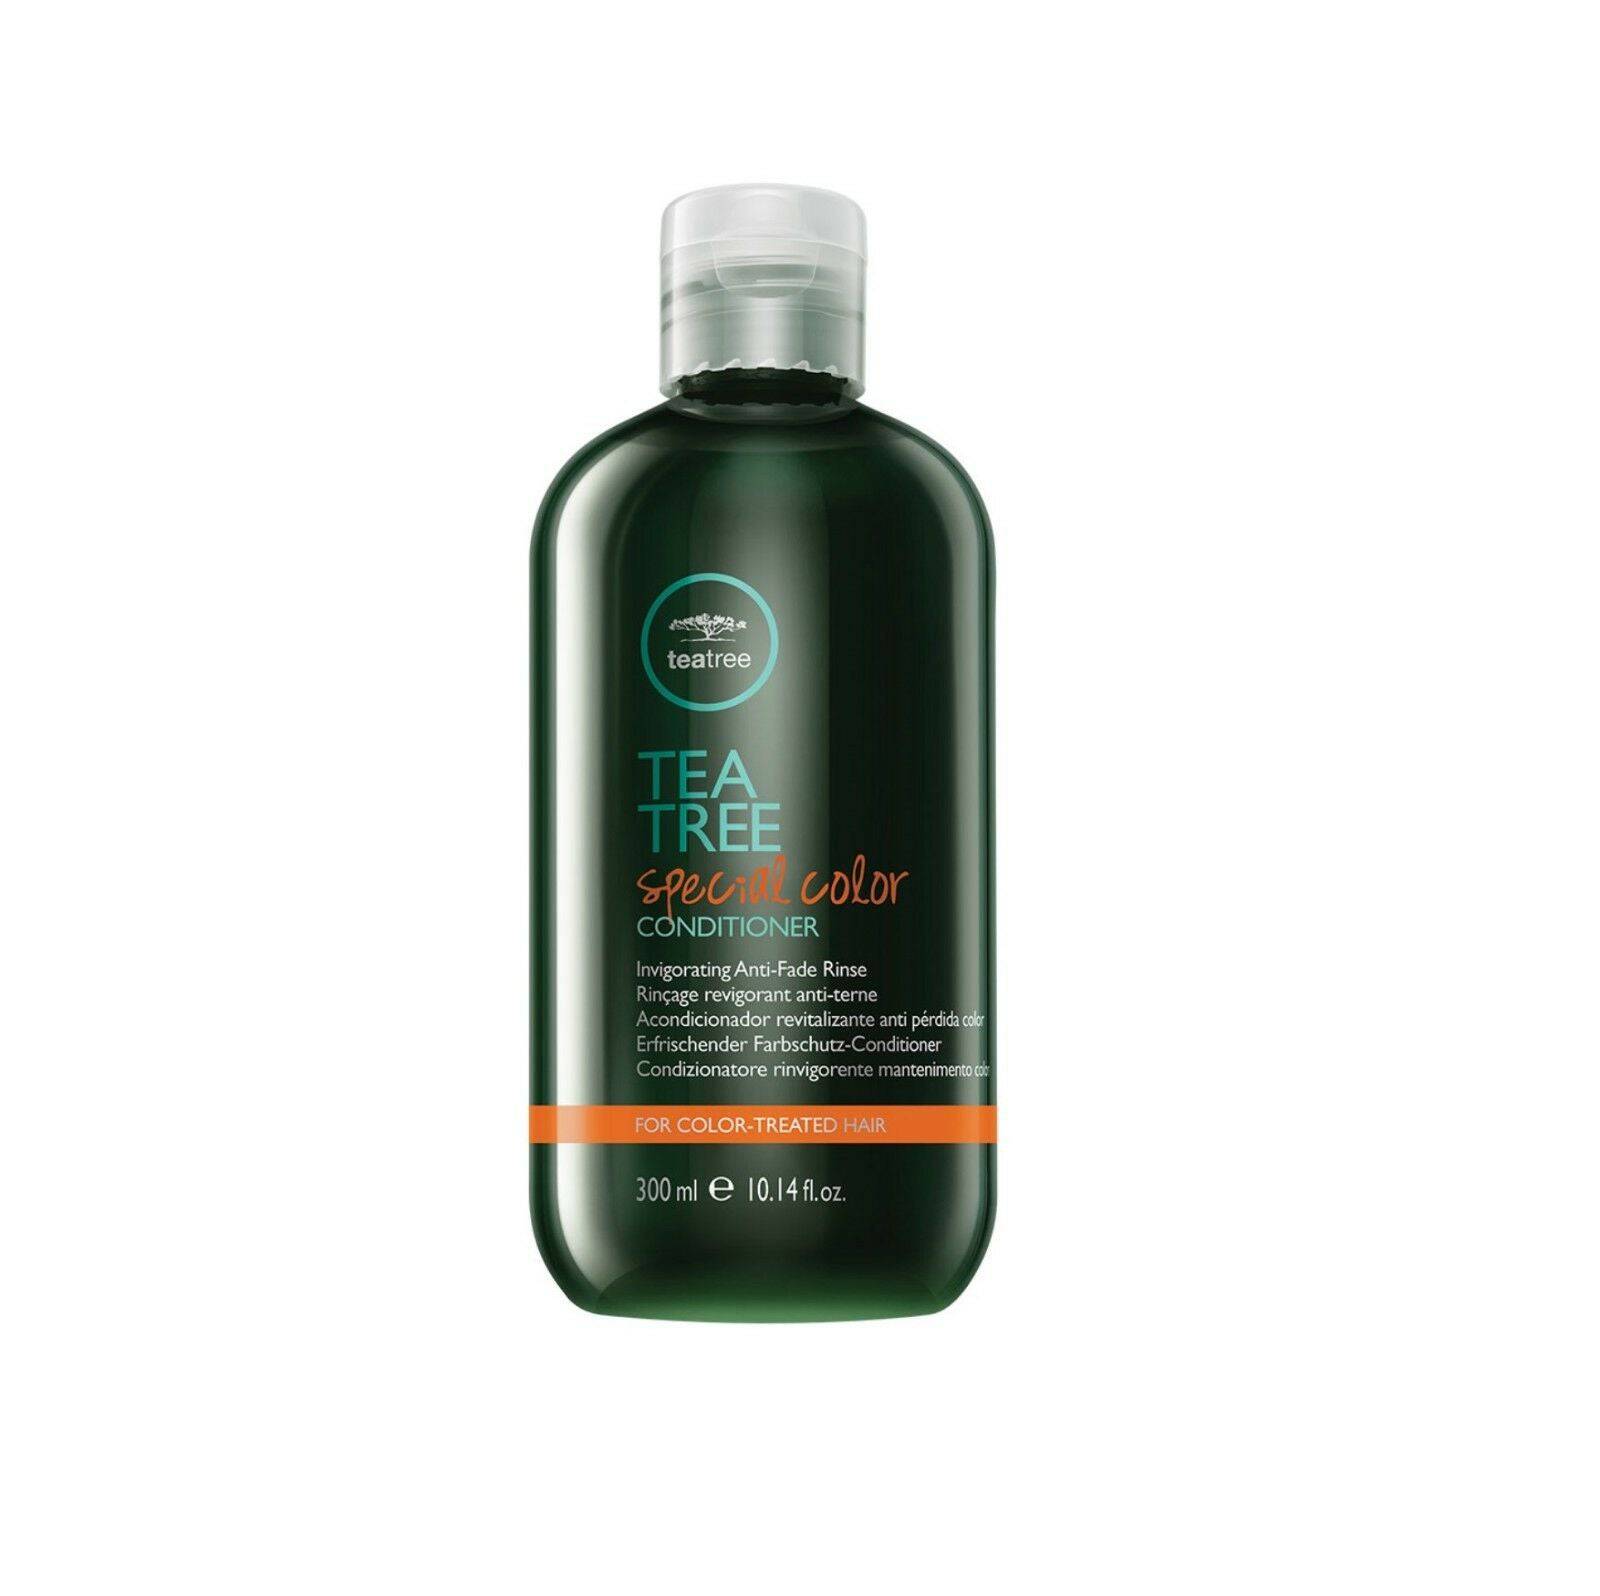 Paul Mitchell Tea Tree Special Color anti fade Shampoo and Conditioner 300ml Duo - On Line Hair Depot